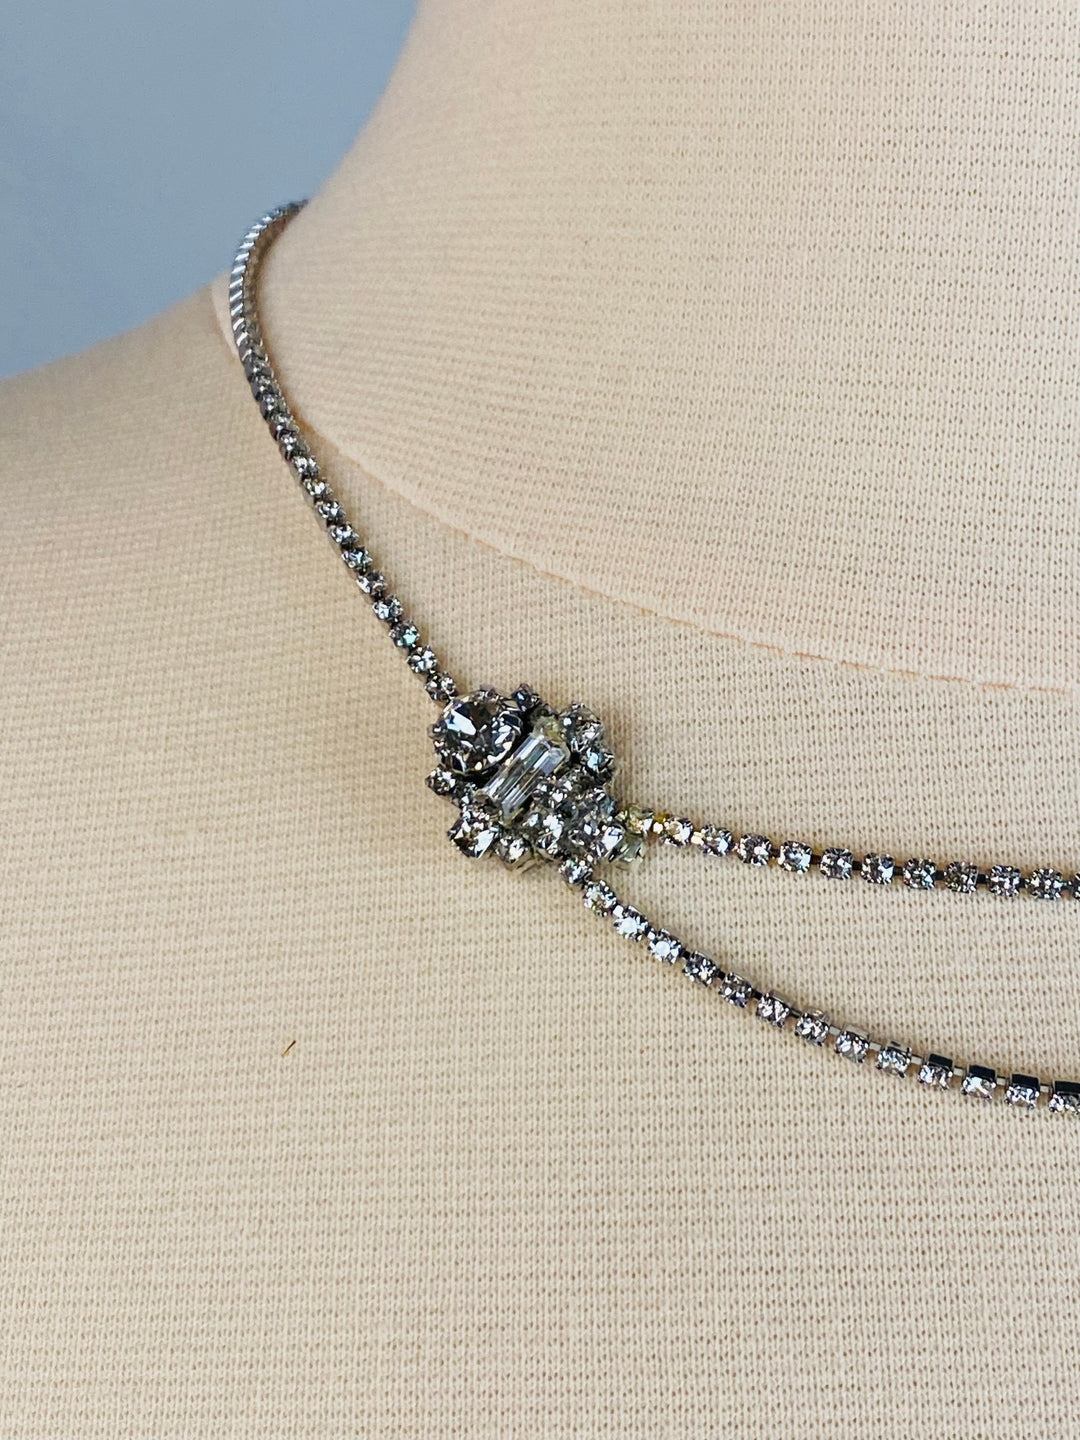 Rhinestone Necklace by Erin Cole